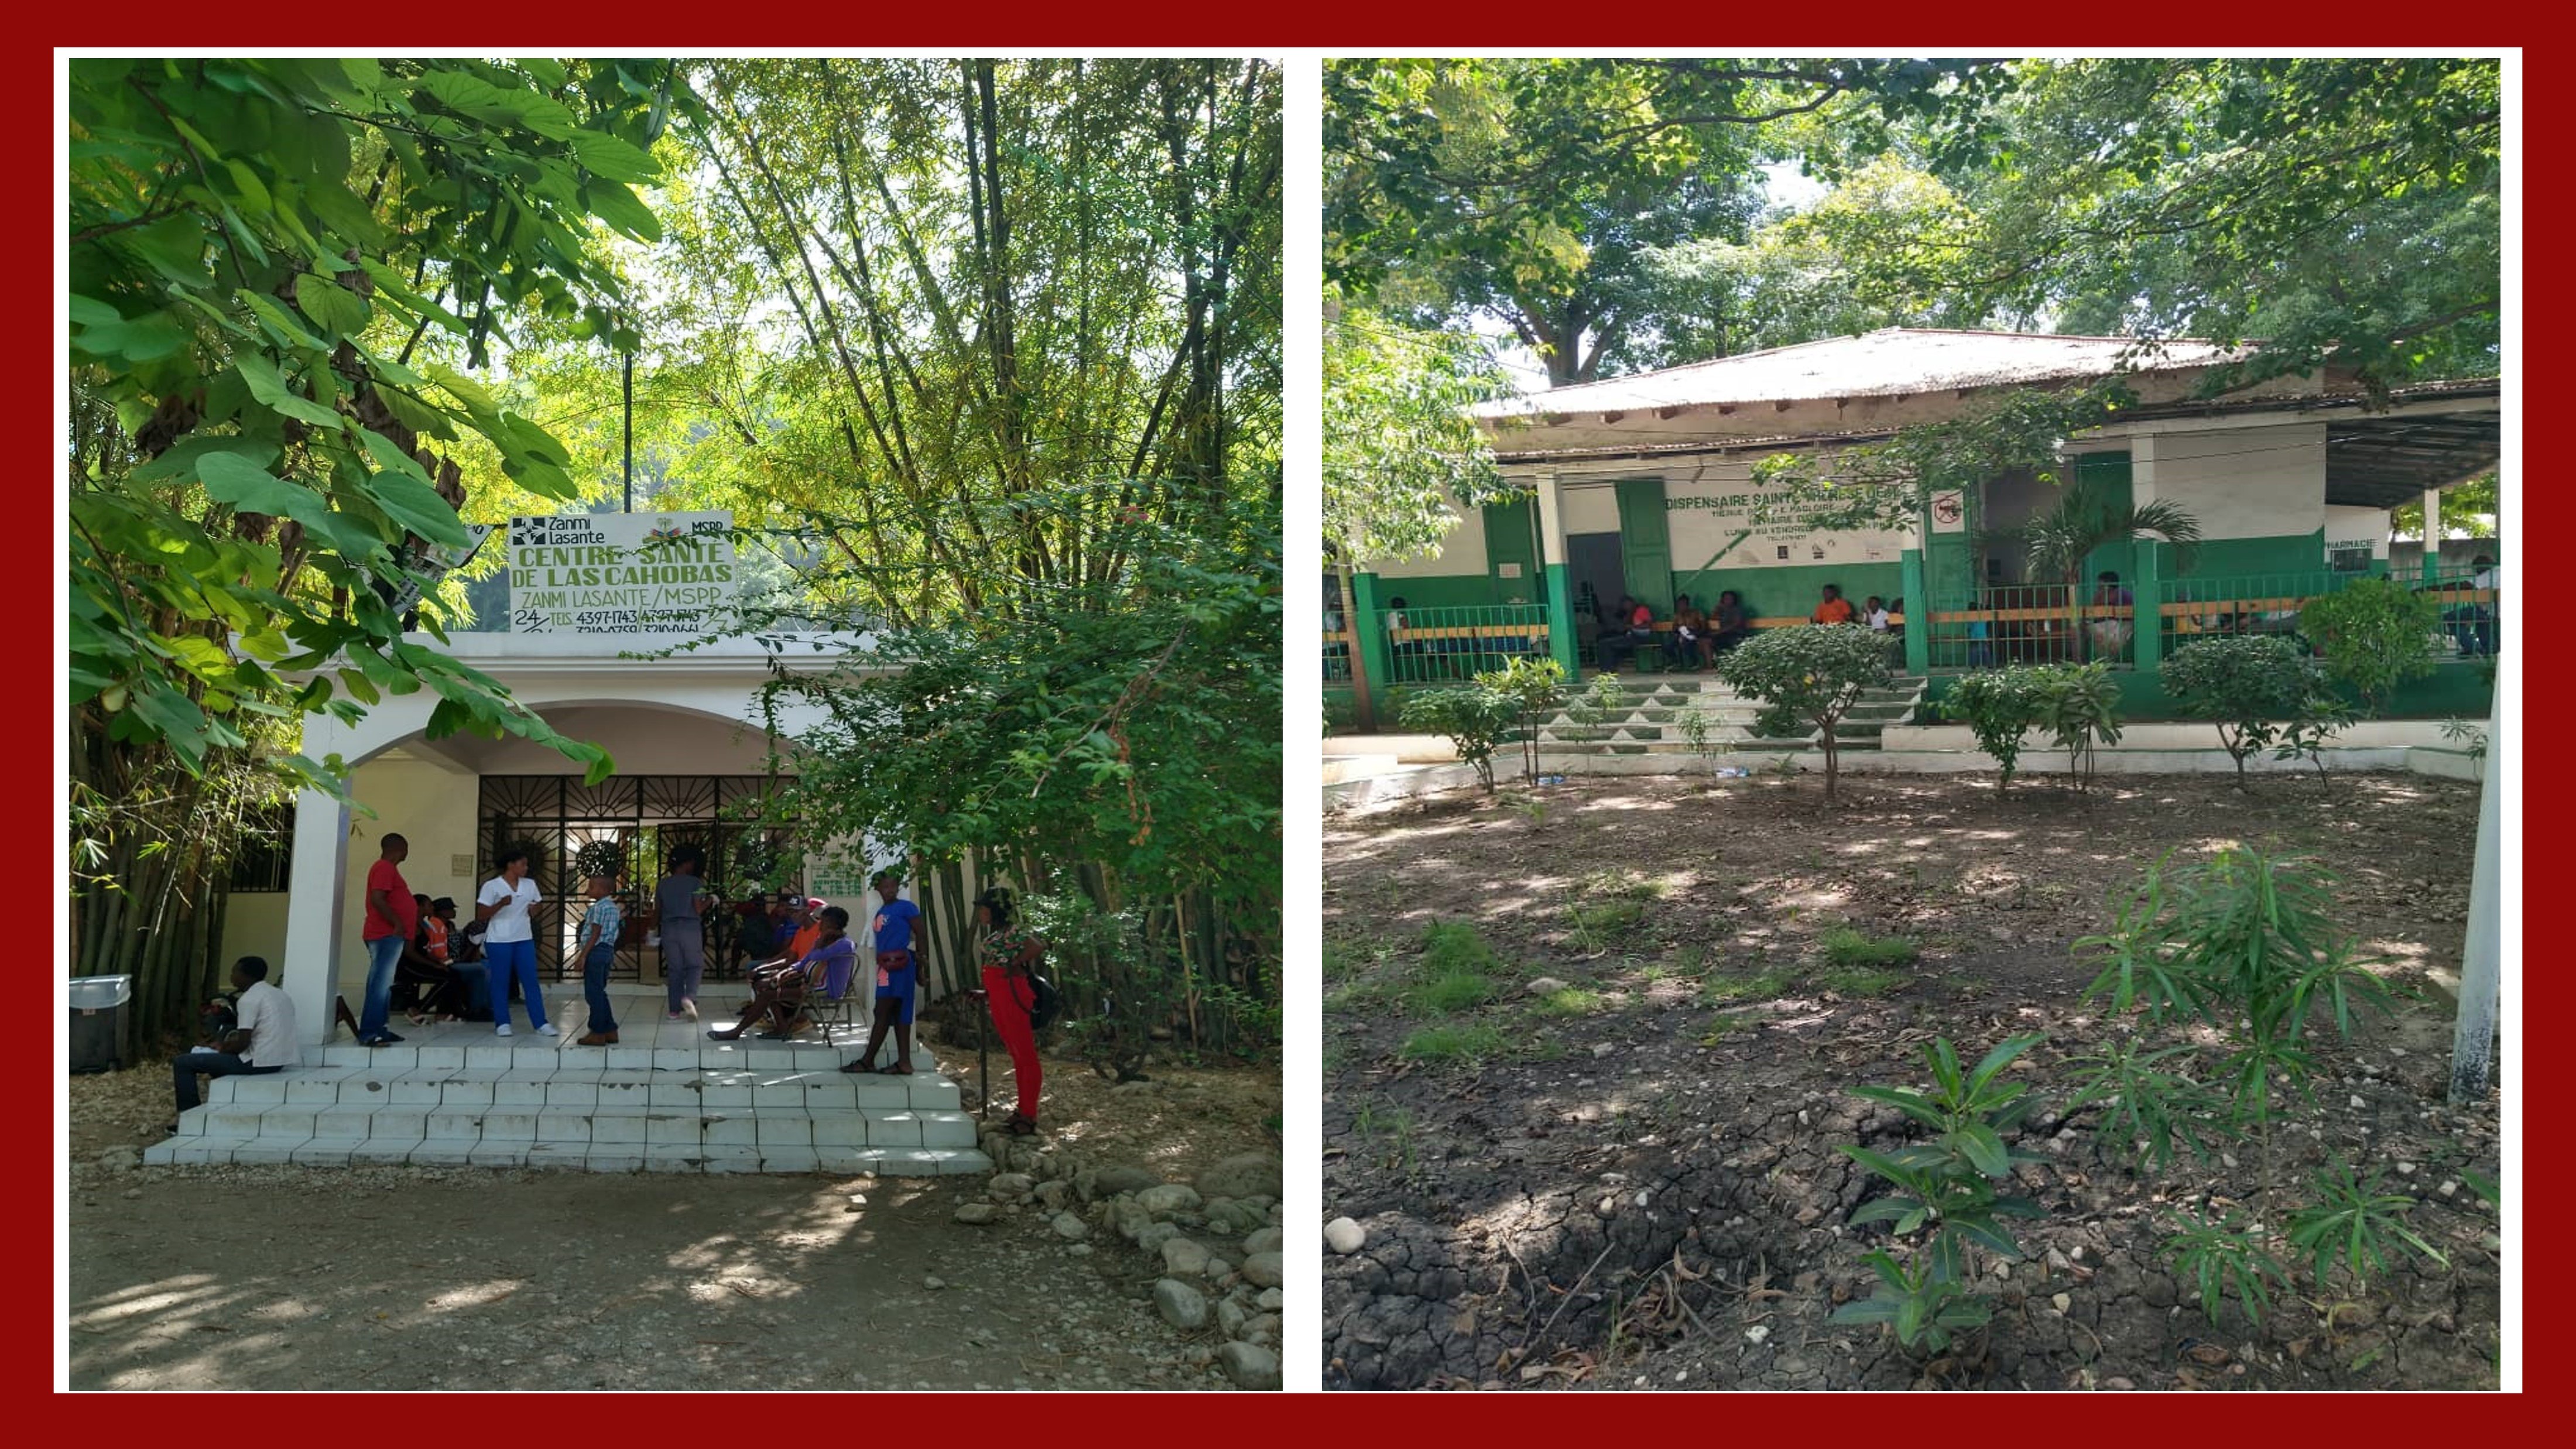 Two pictures of clinics in Haiti. Both are small buildings with people out front. Both buildings are in unpaved and heavily forested areas.